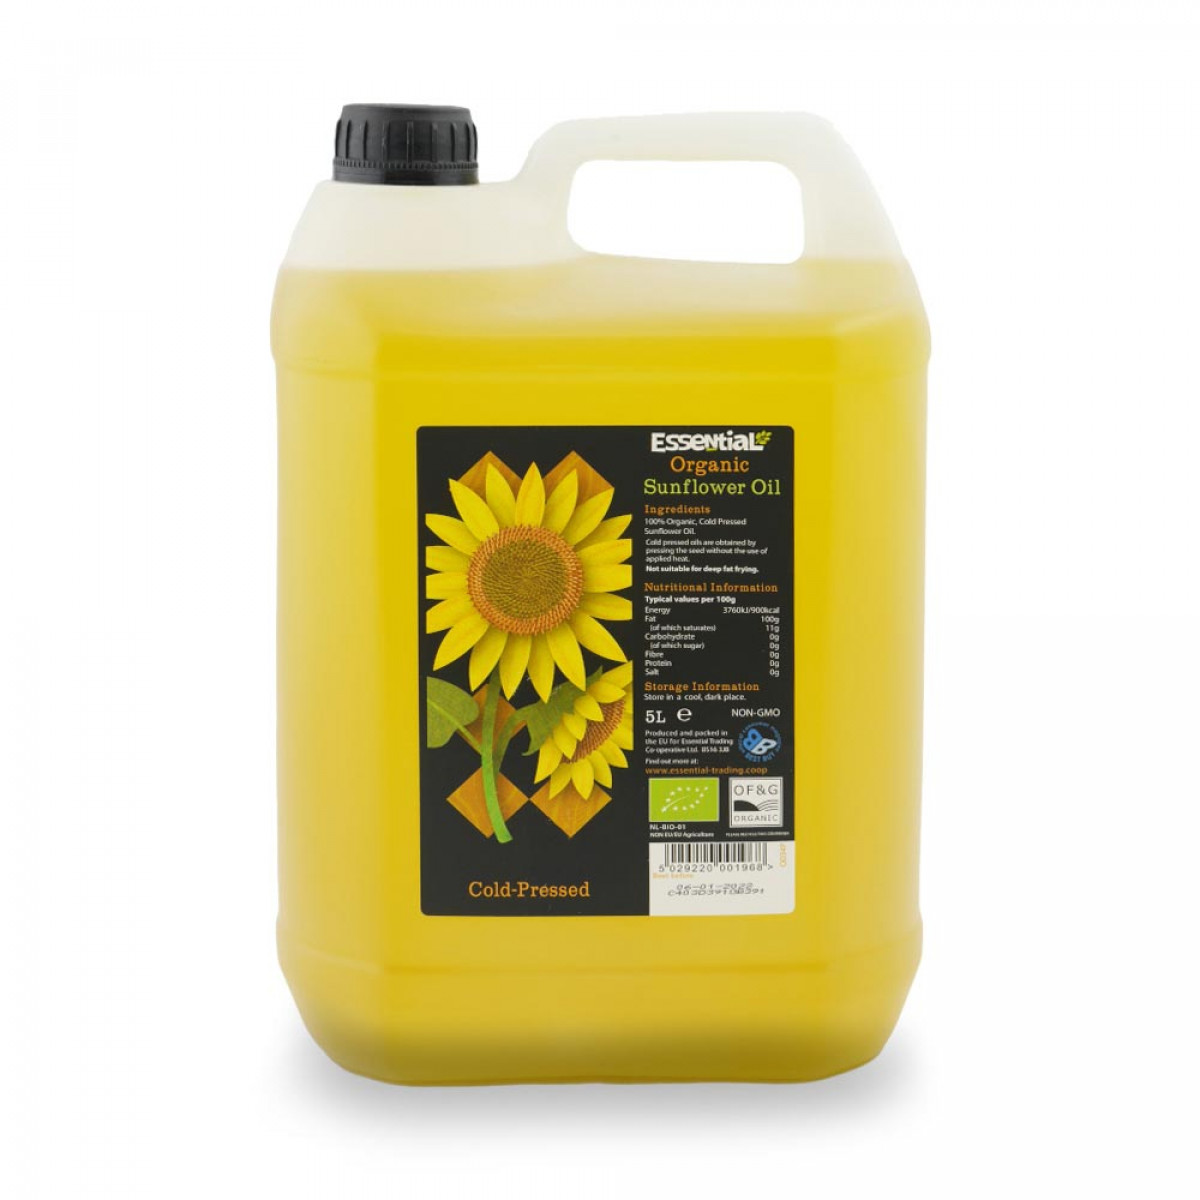 Product picture for Sunflower Oil - Cold Pressed